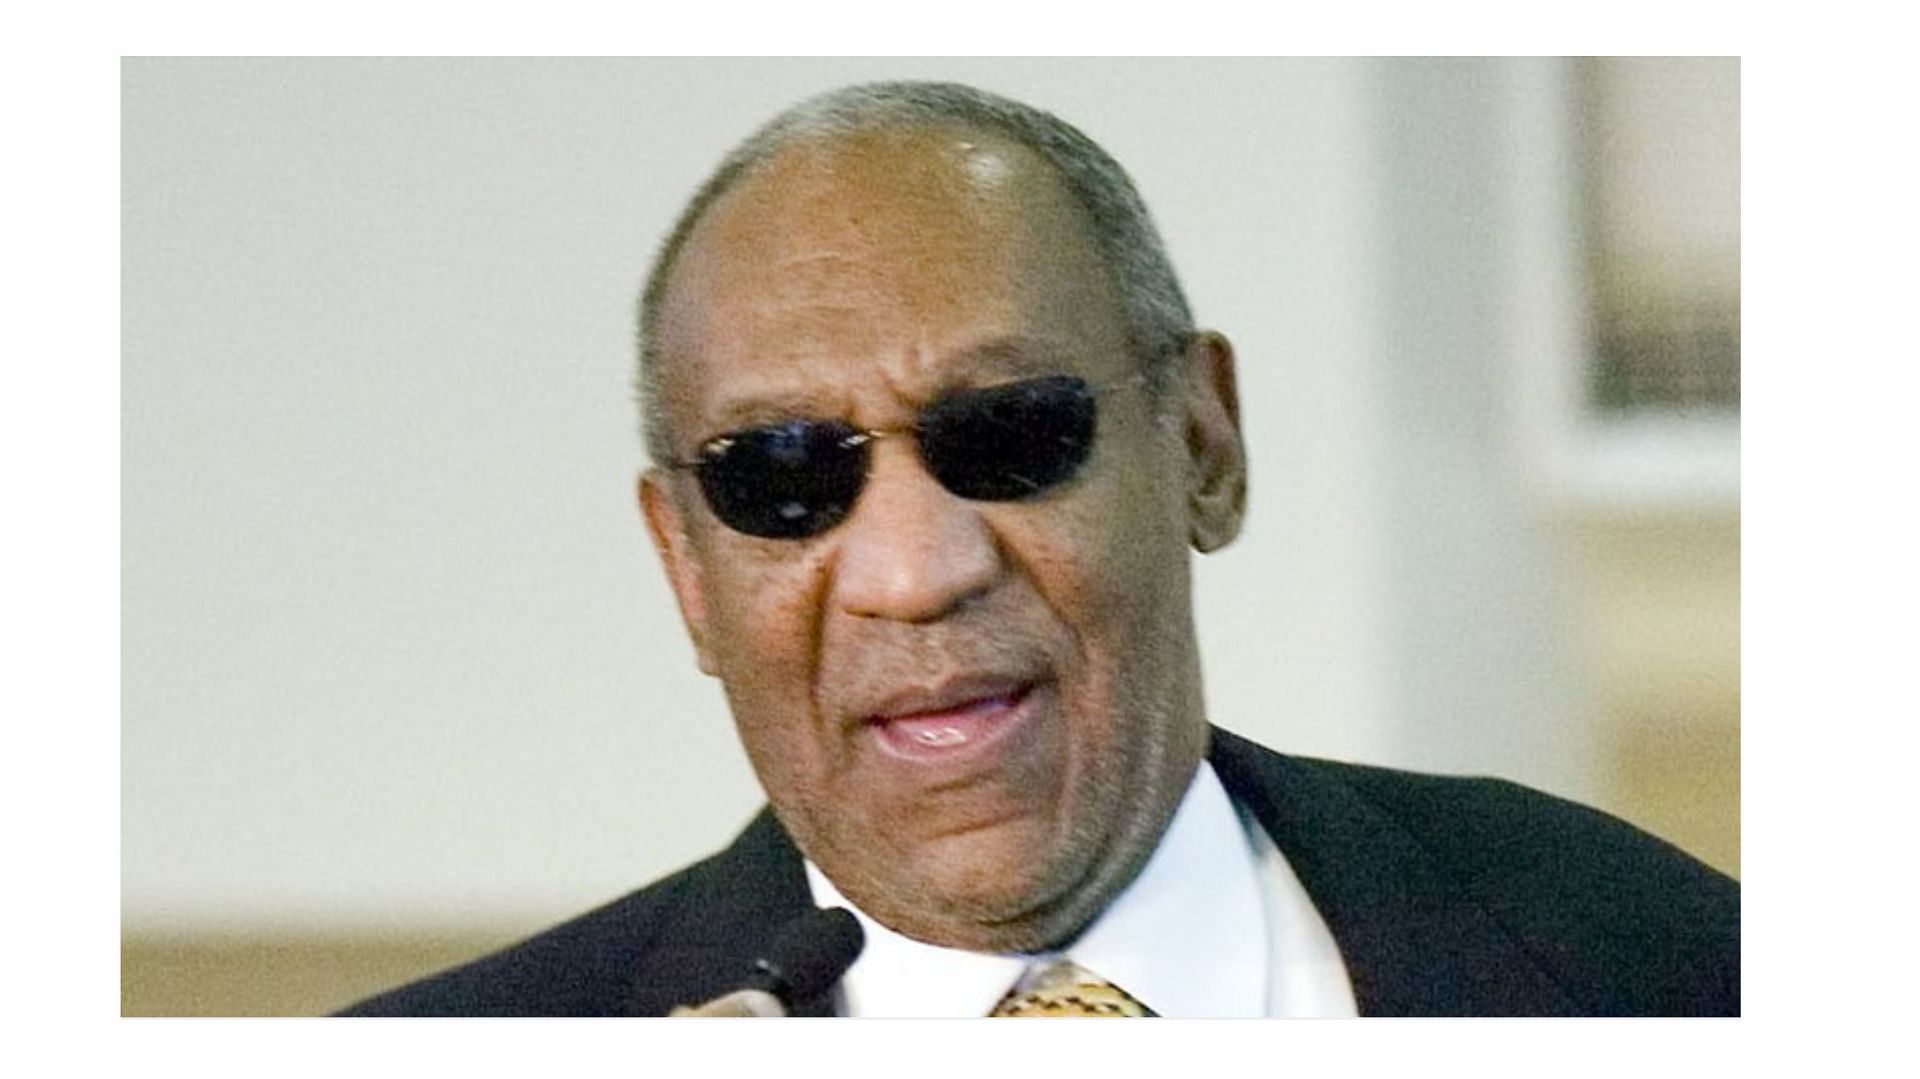 The Jury deemed Bill Cosby guilty of assaulting a minor in 1975 (image via United States Navy/ Scott King)